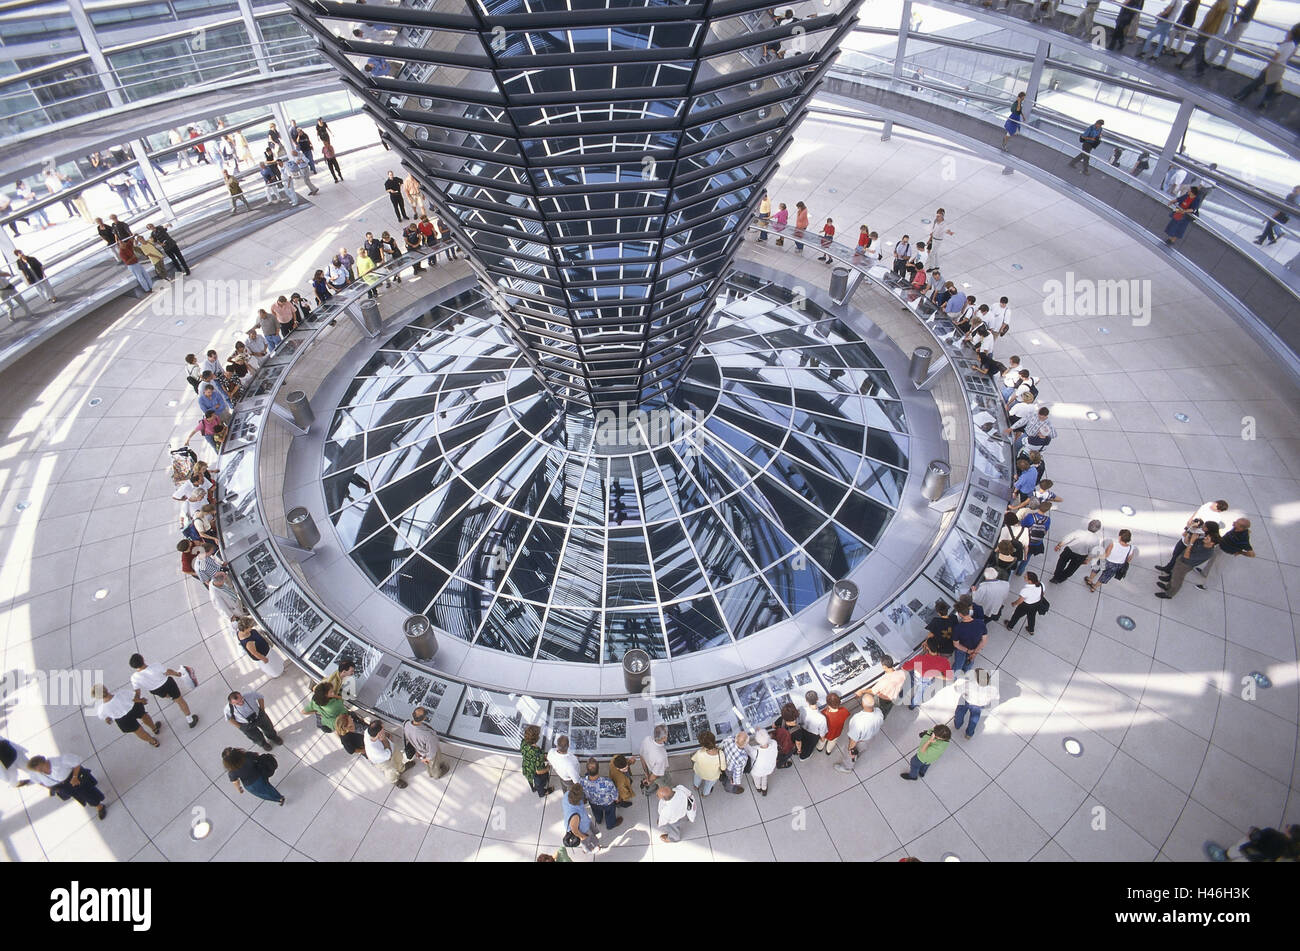 Germany, Berlin, Reichstag building, dome, interior, visitors, Stock Photo